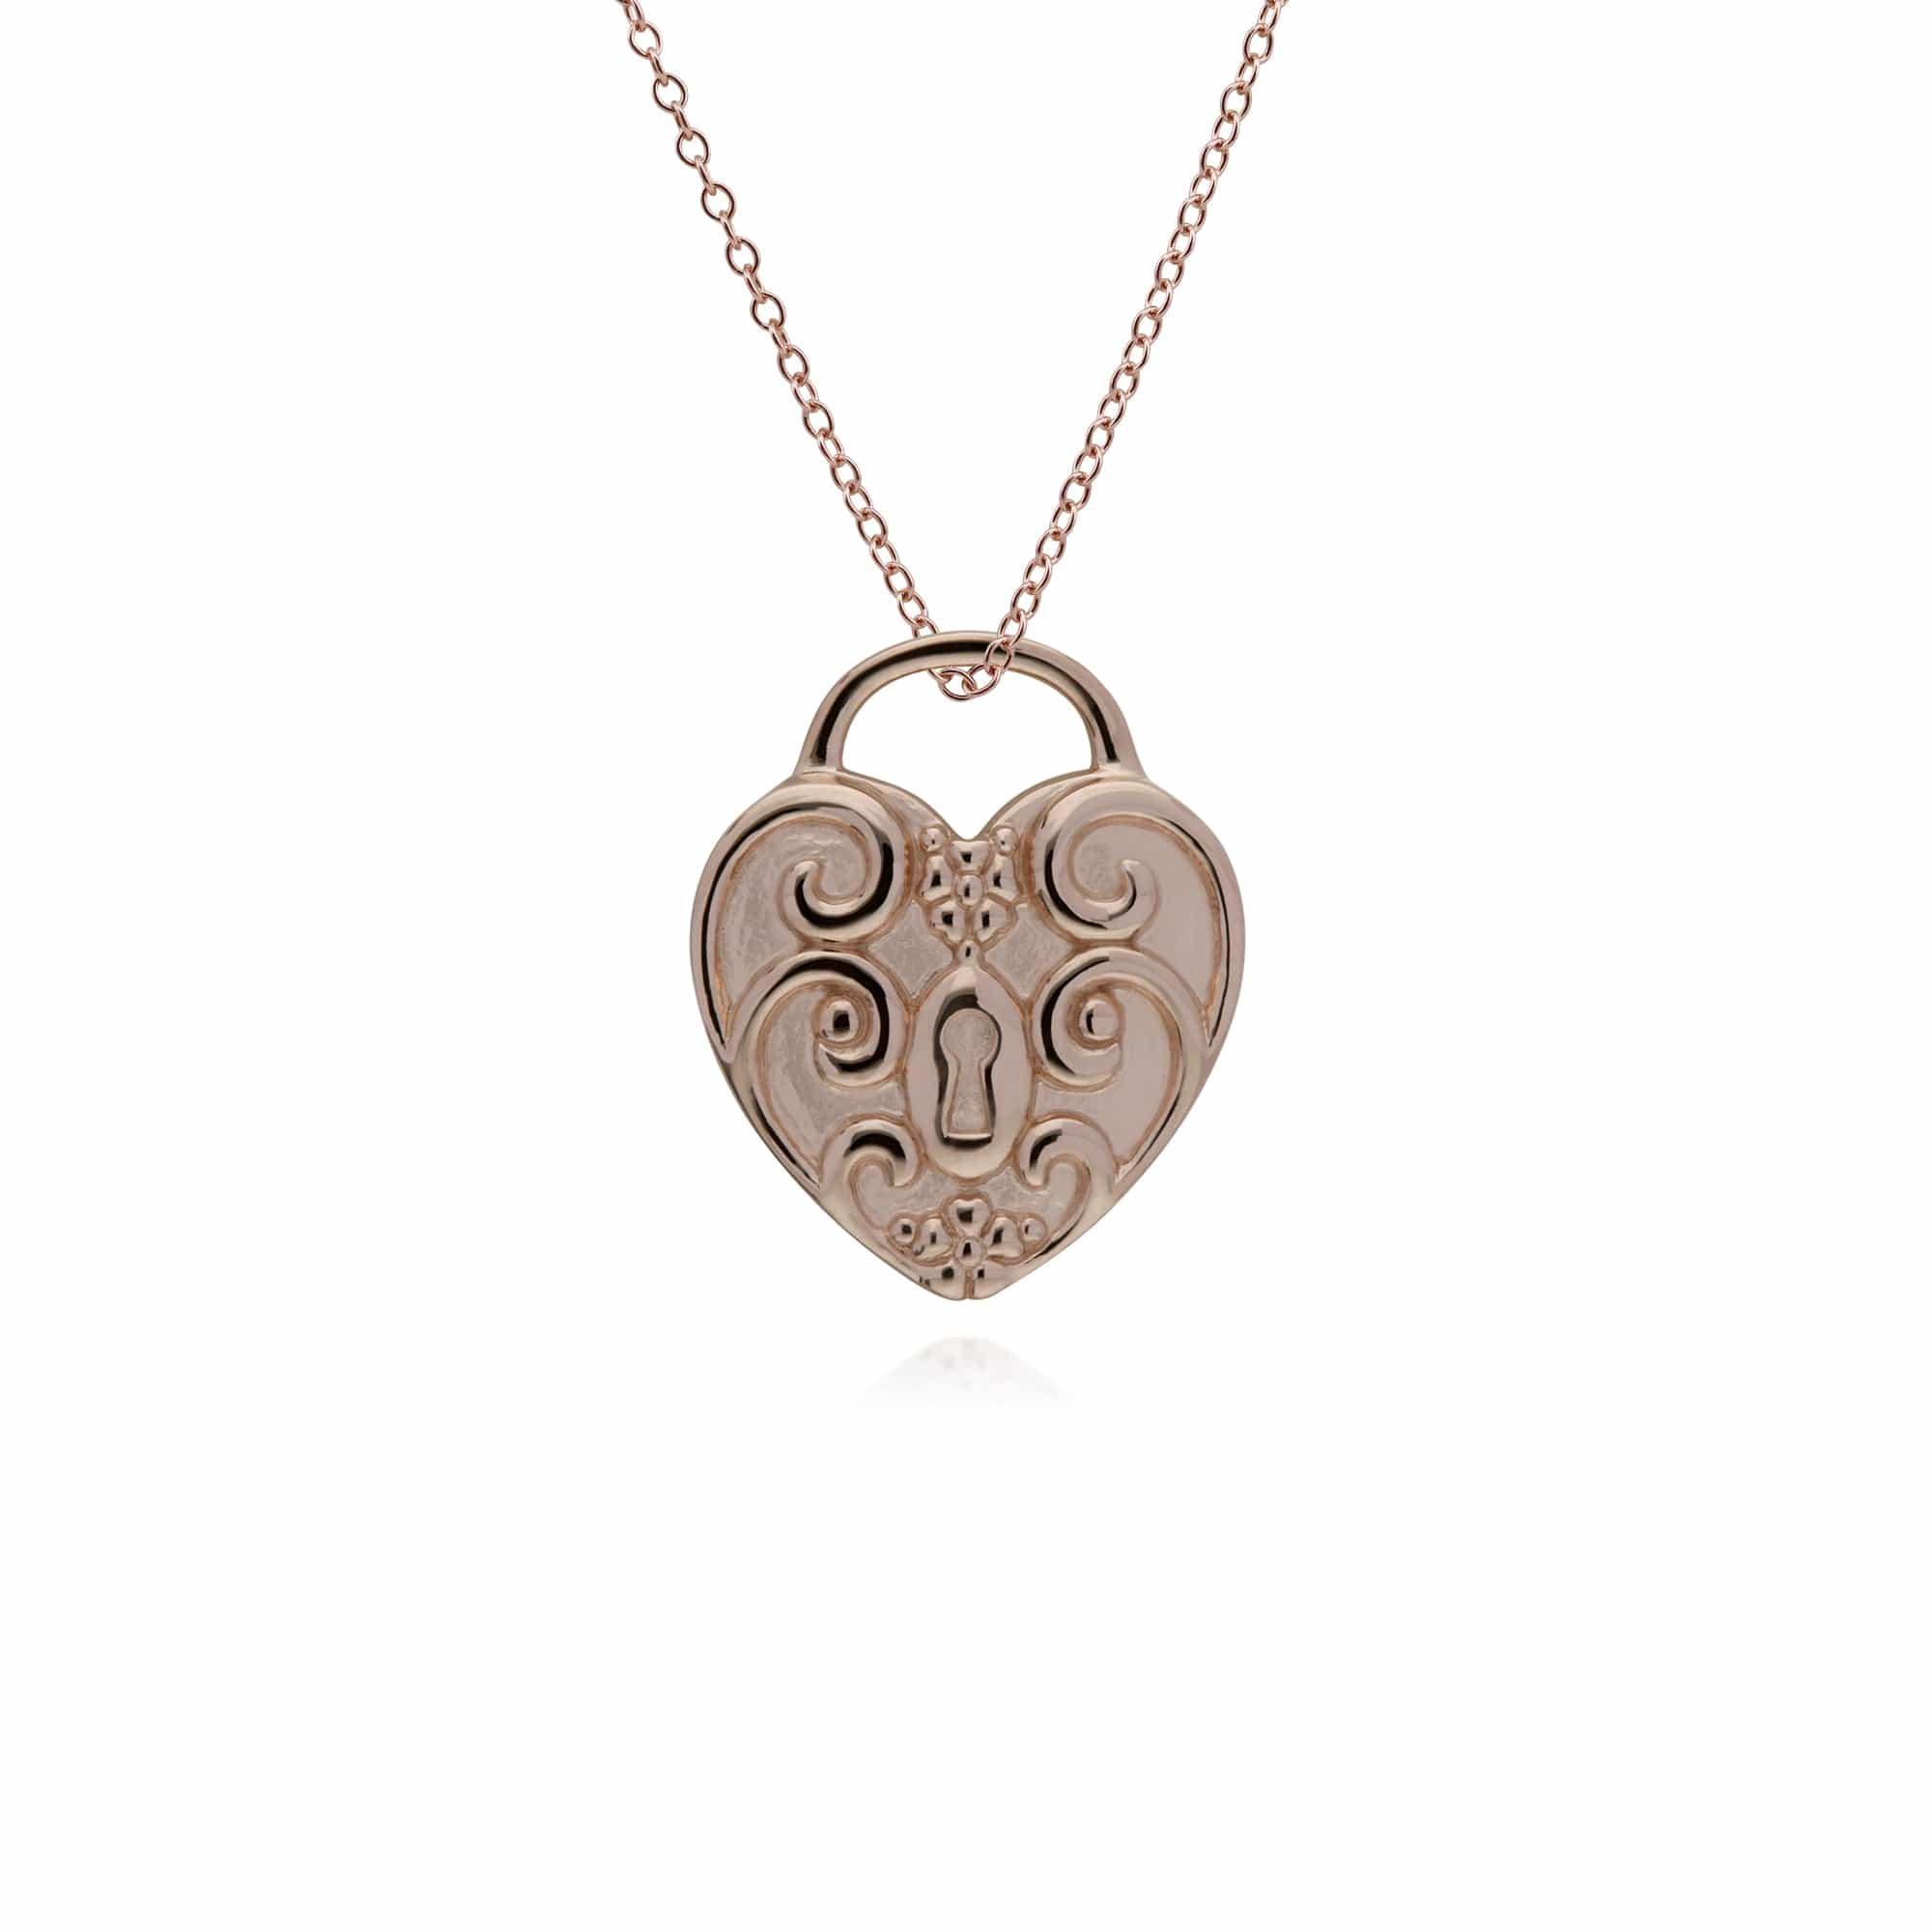 270P026704925-270P026501925 Classic Swirl Heart Lock Pendant & Emerald Big Key Charm in Rose Gold Plated 925 Sterling Silver 3